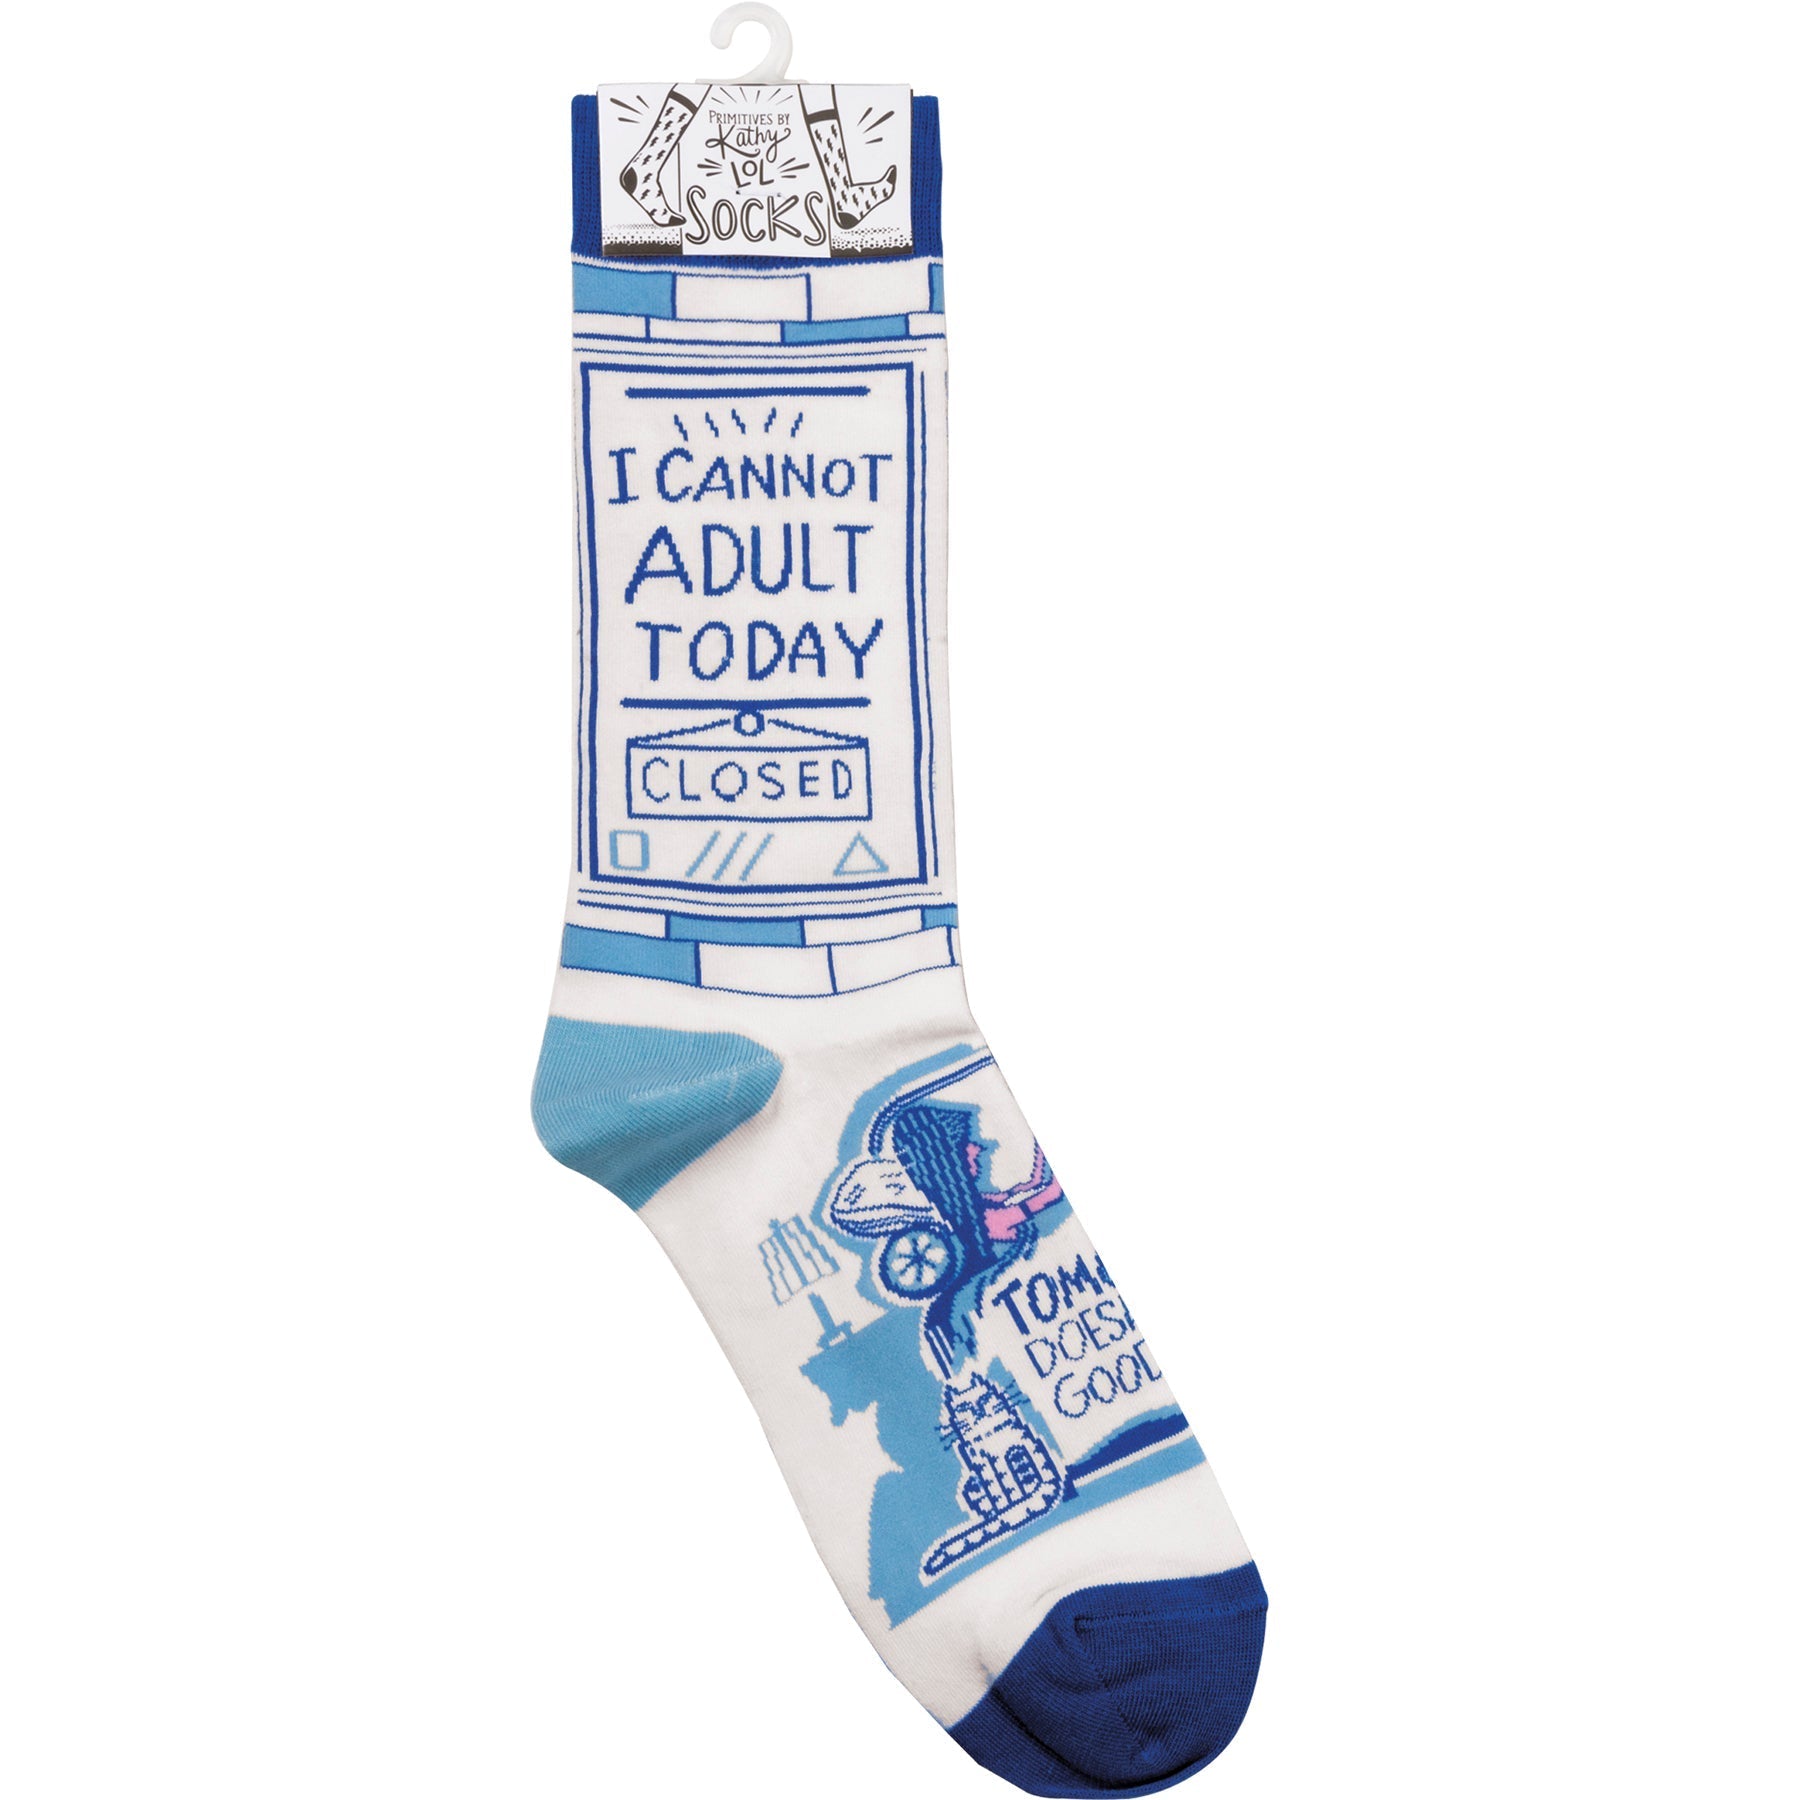 I Cannot Adult Today - Tomorrow Doesn't Look Good Either Funny Novelty Socks